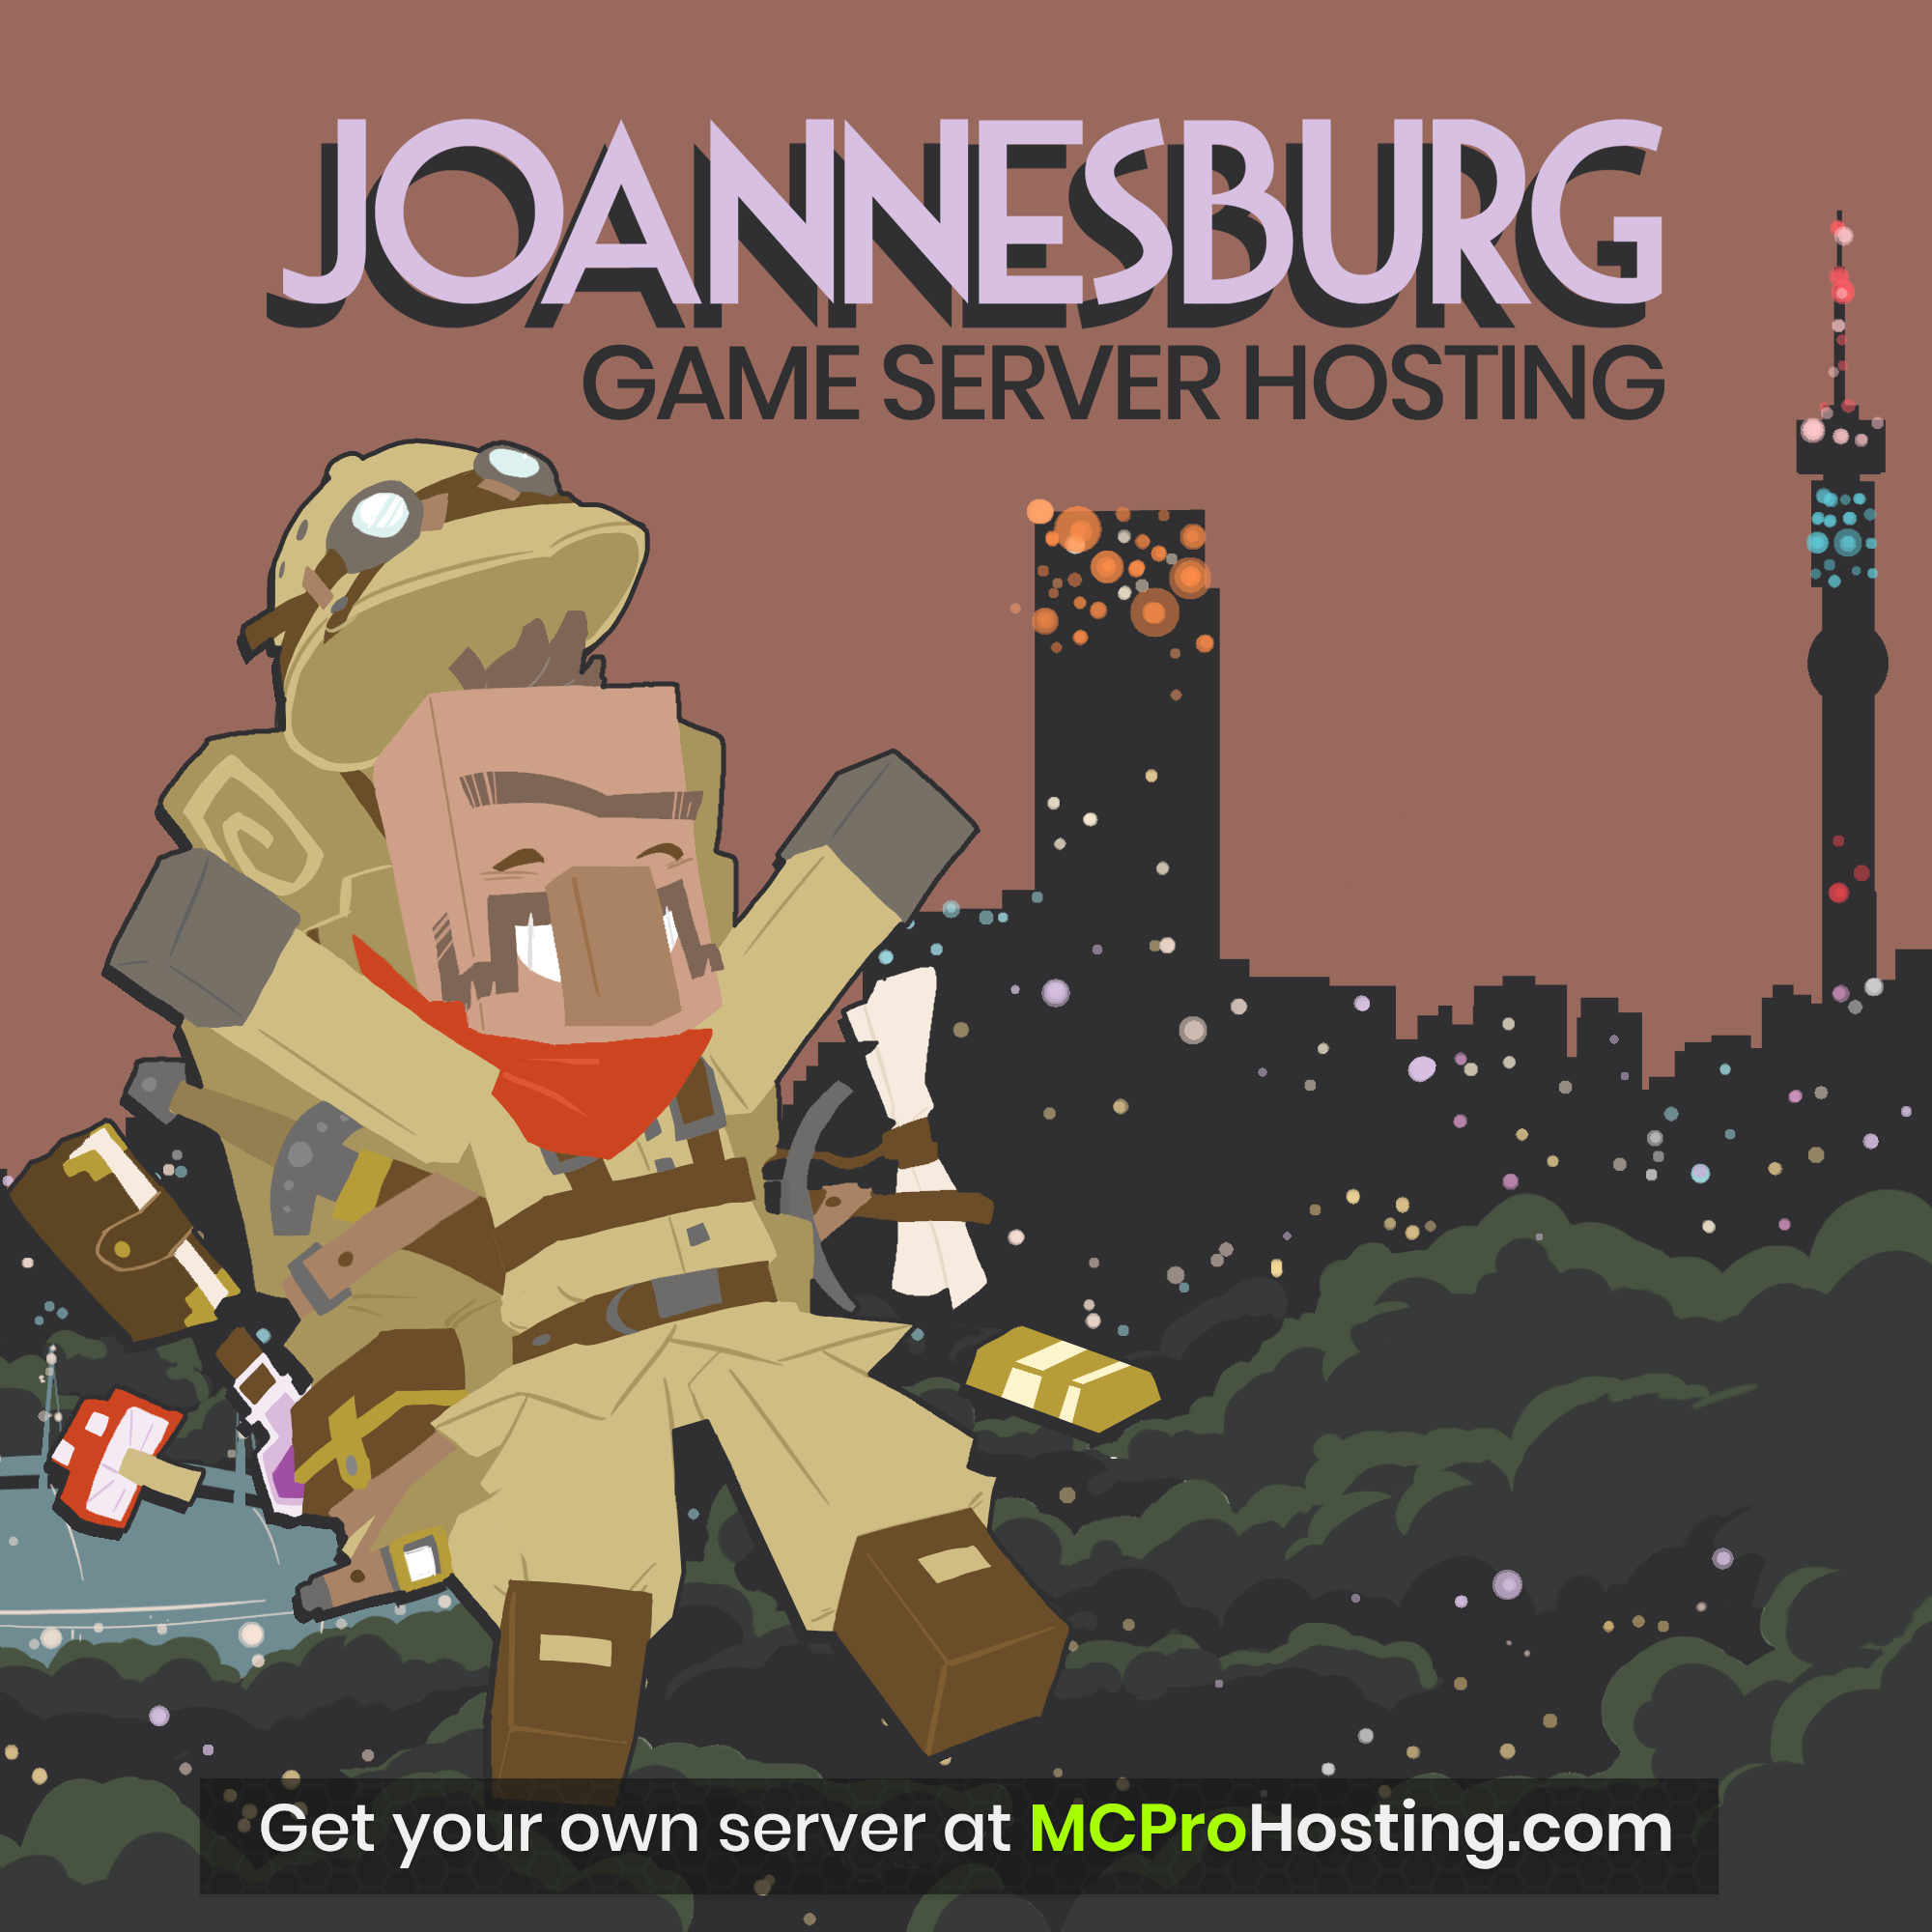 Server hosting in Johannesburg, South Africa is now available!